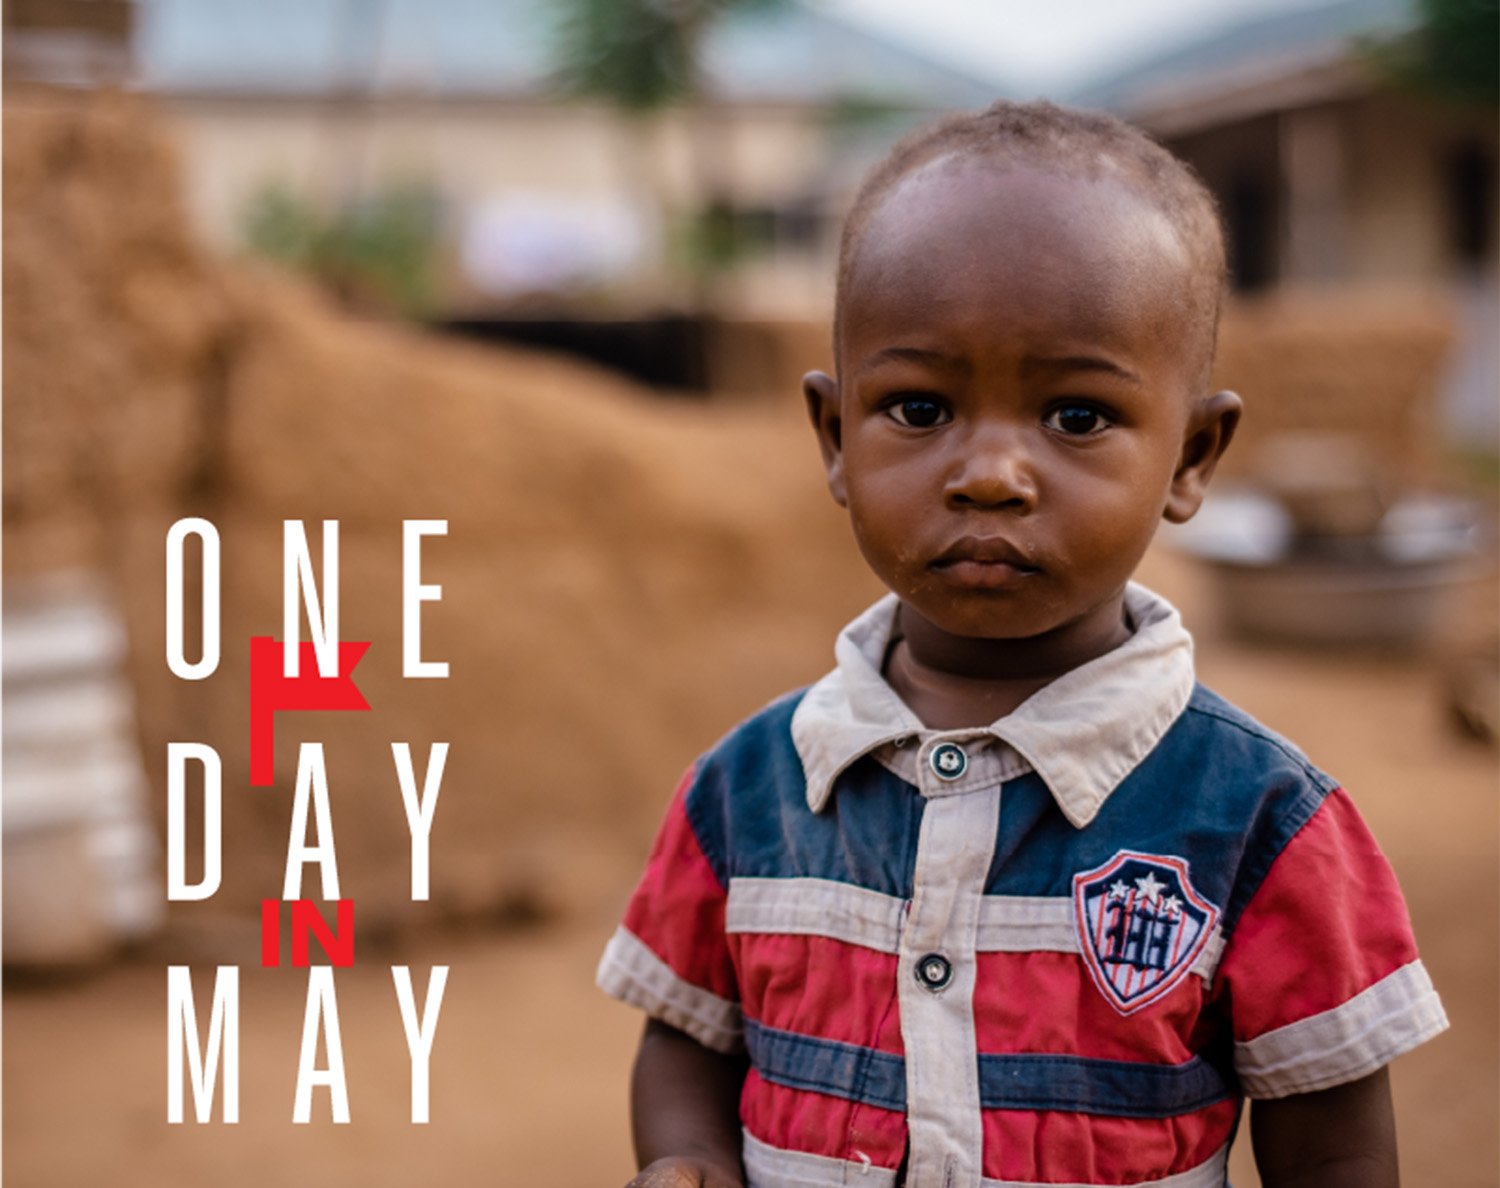 Help us stop international trafficking for one day in May.